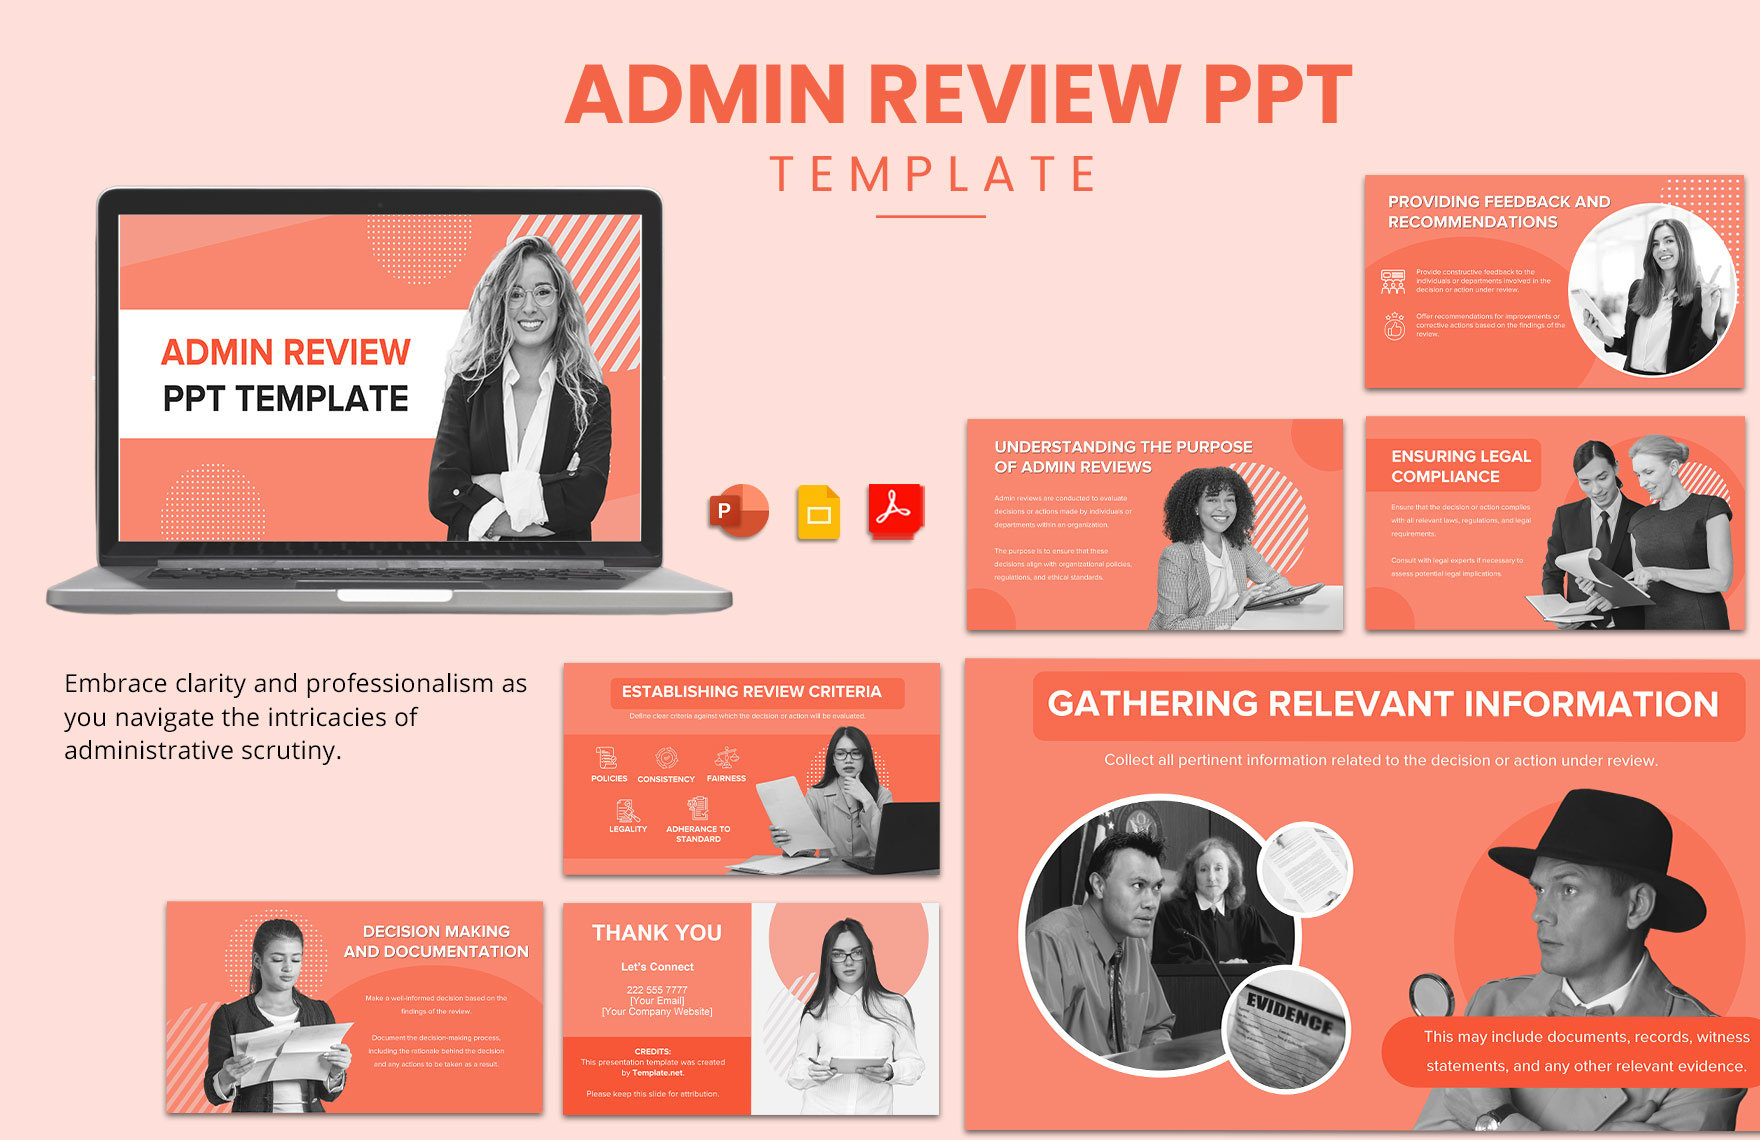 Admin Review PPT Template